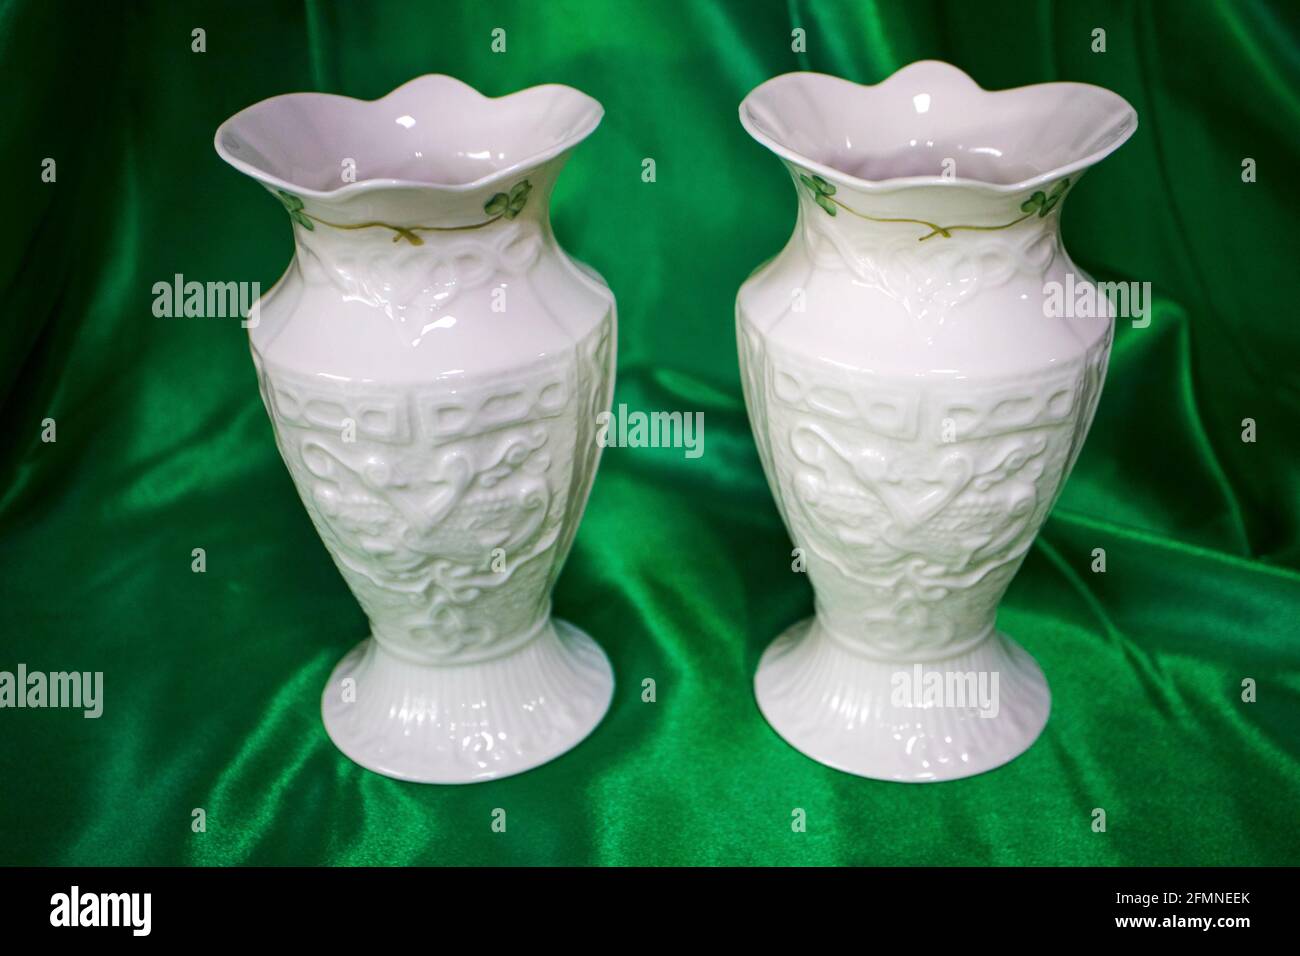 How much is a piece of belleek pottery worth?